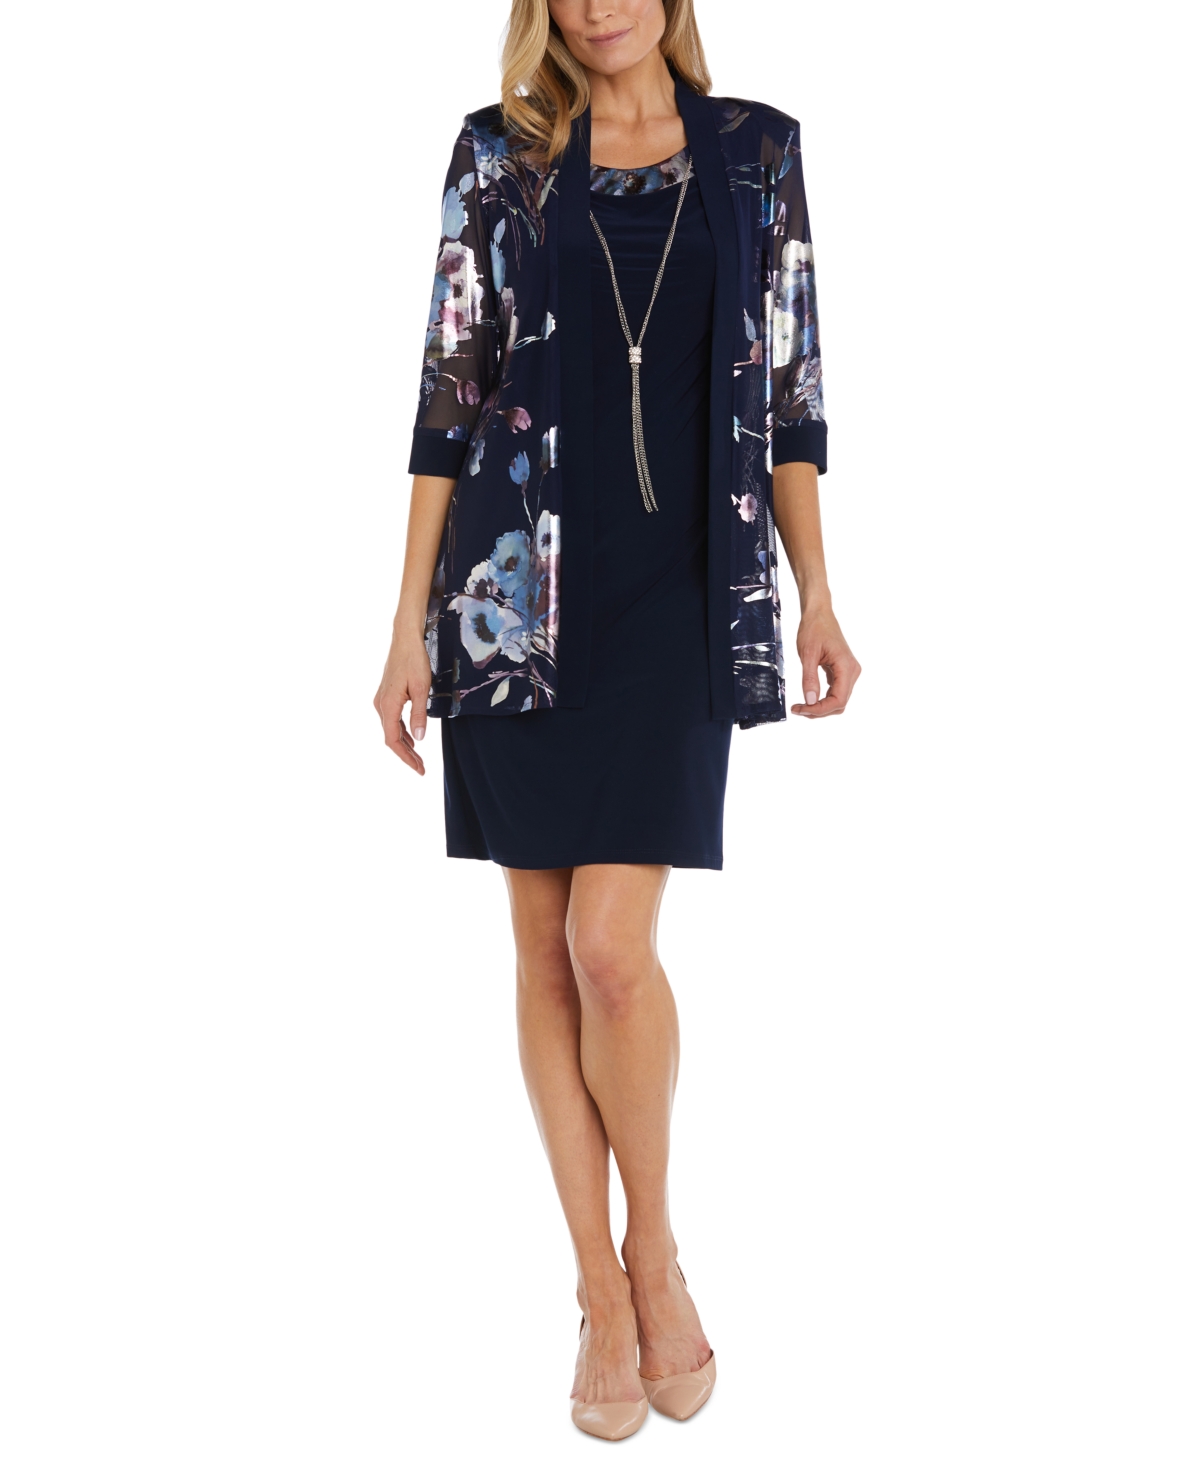 Women's Necklace Printed-Jacket Dress - Navy/Periwinkle